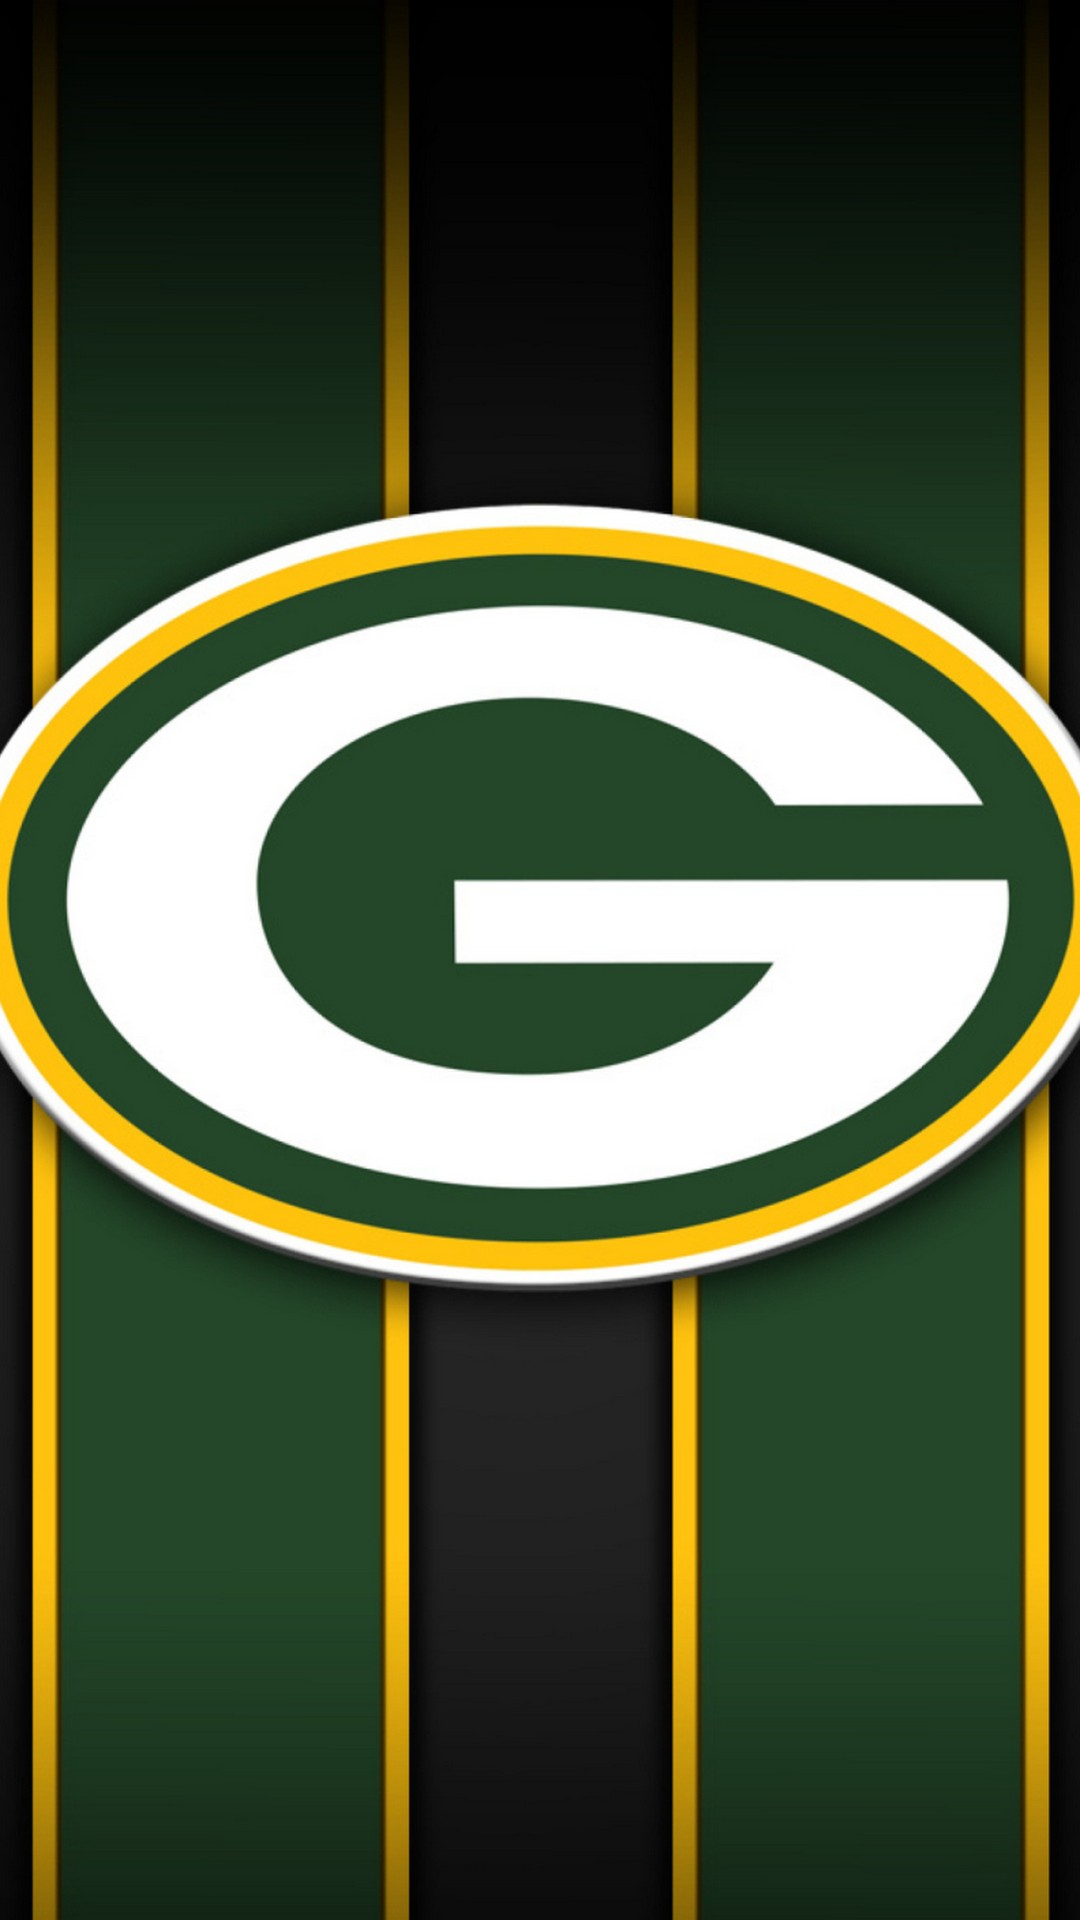 Green Bay Packers iPhone XS Wallpaper with high-resolution 1080x1920 pixel. Download and set as wallpaper for Apple iPhone X, XS Max, XR, 8, 7, 6, SE, iPad, Android